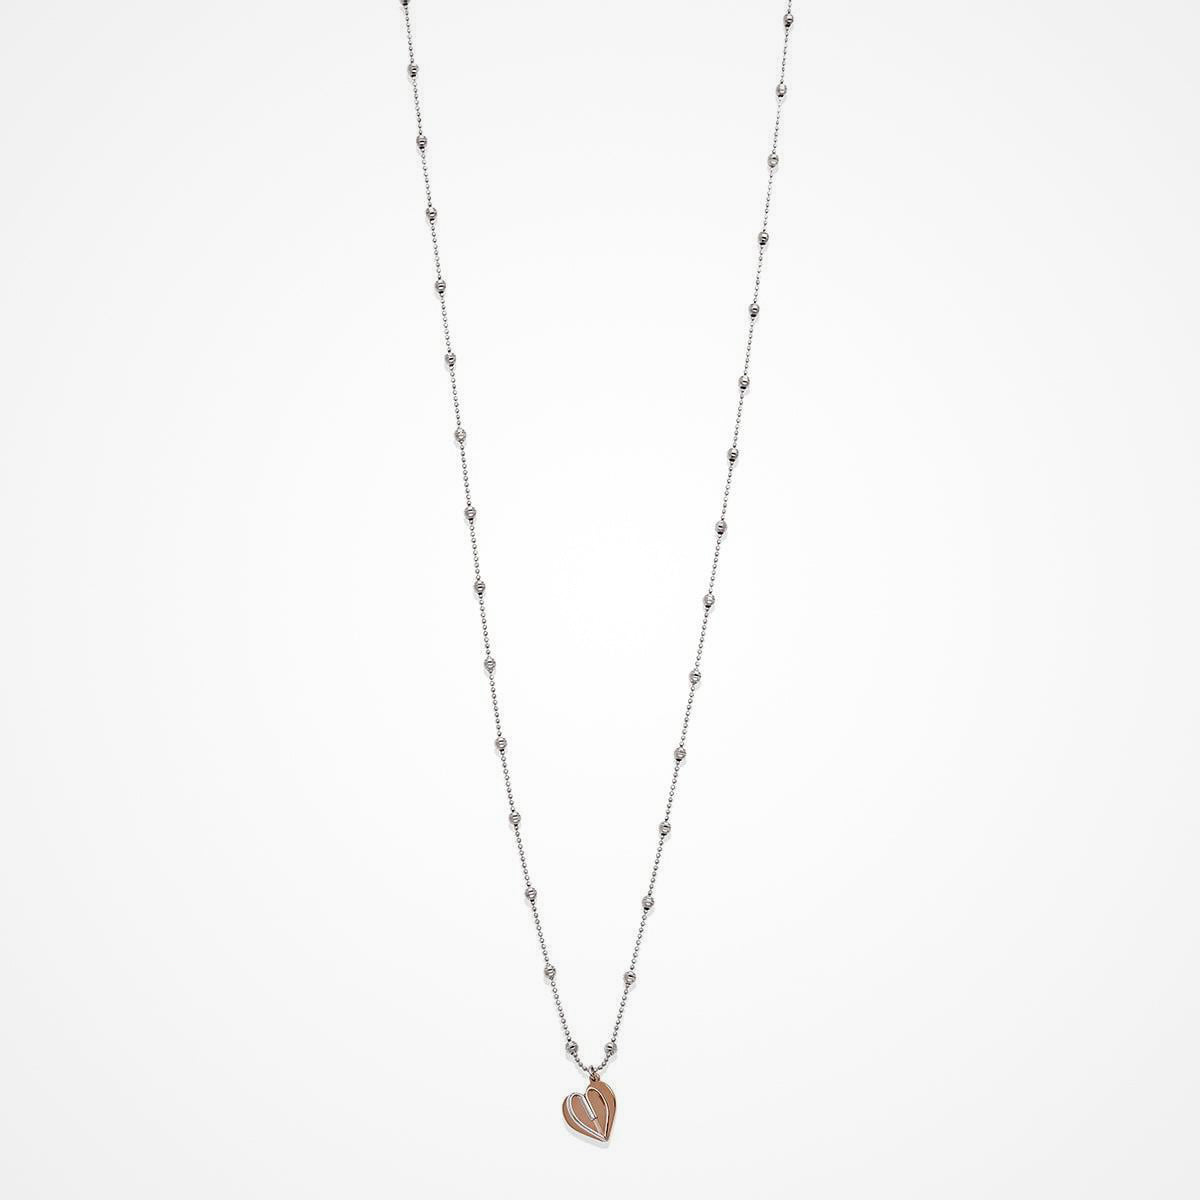 AMORE2 NECKLACE